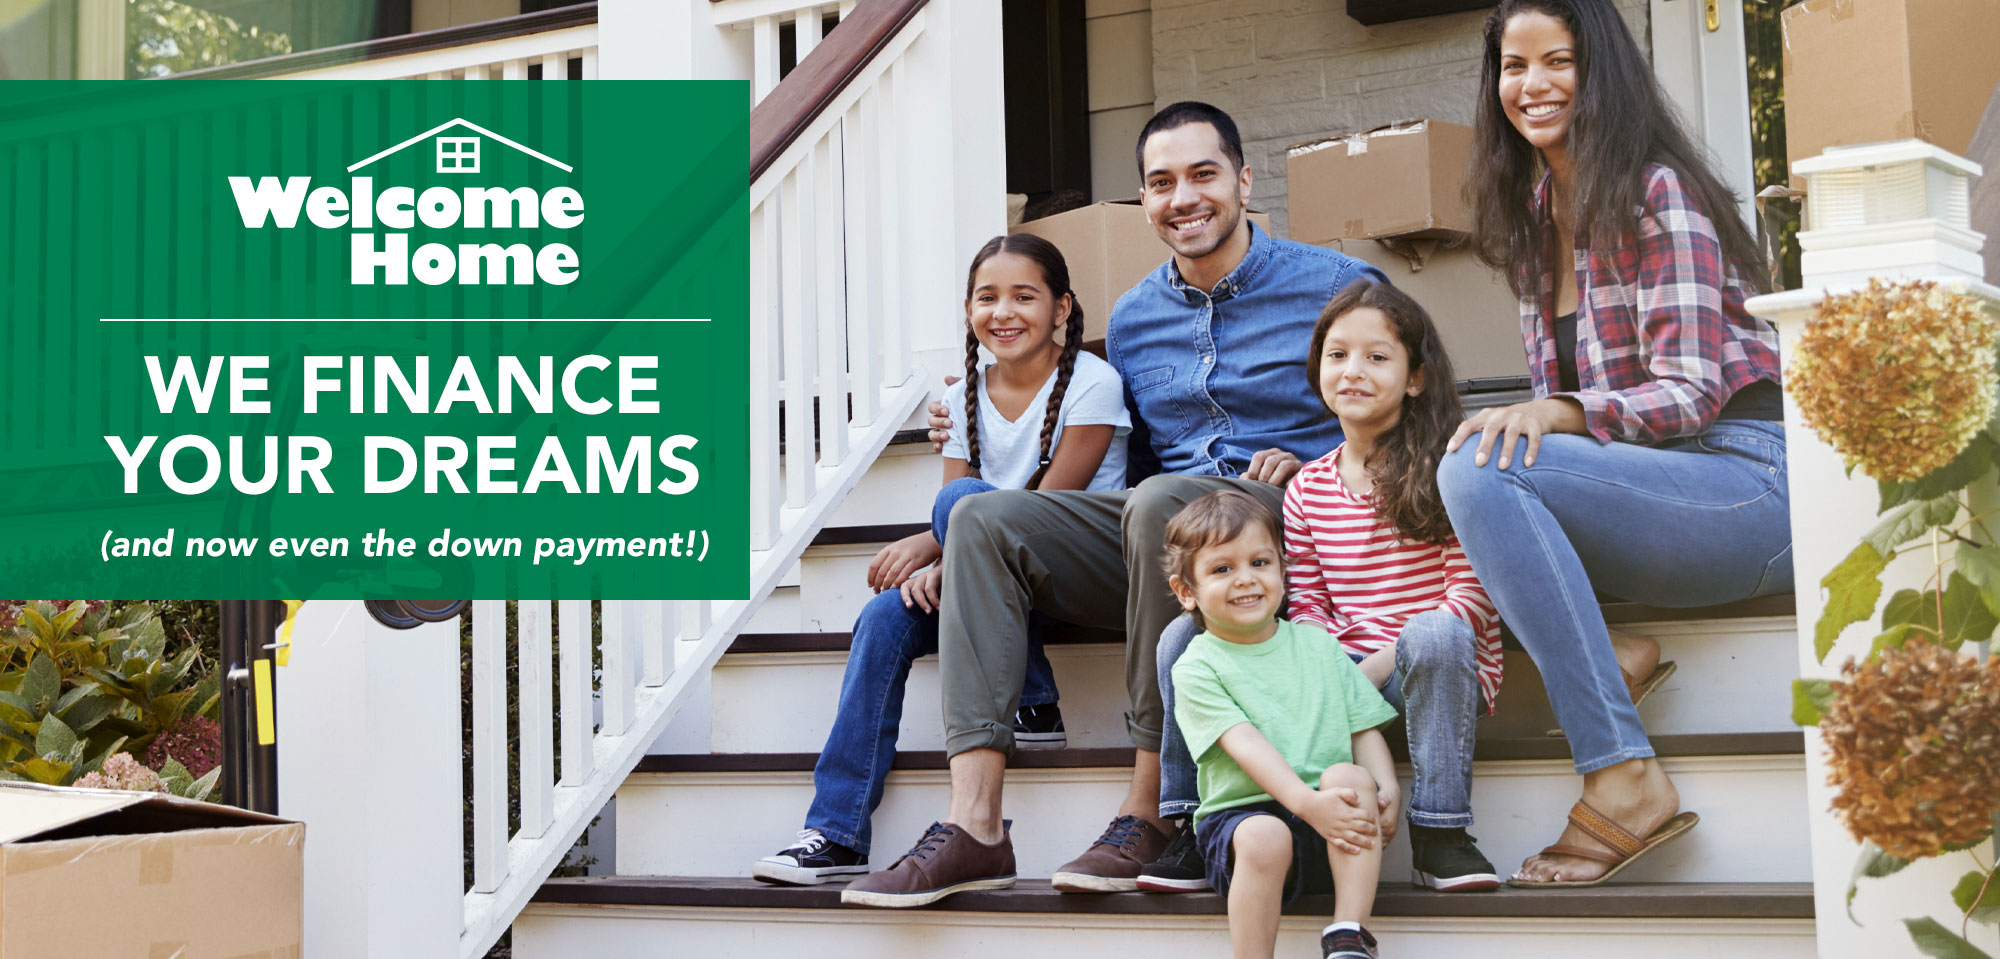 Welcome Home. We finance your dreams and now even the down payment!